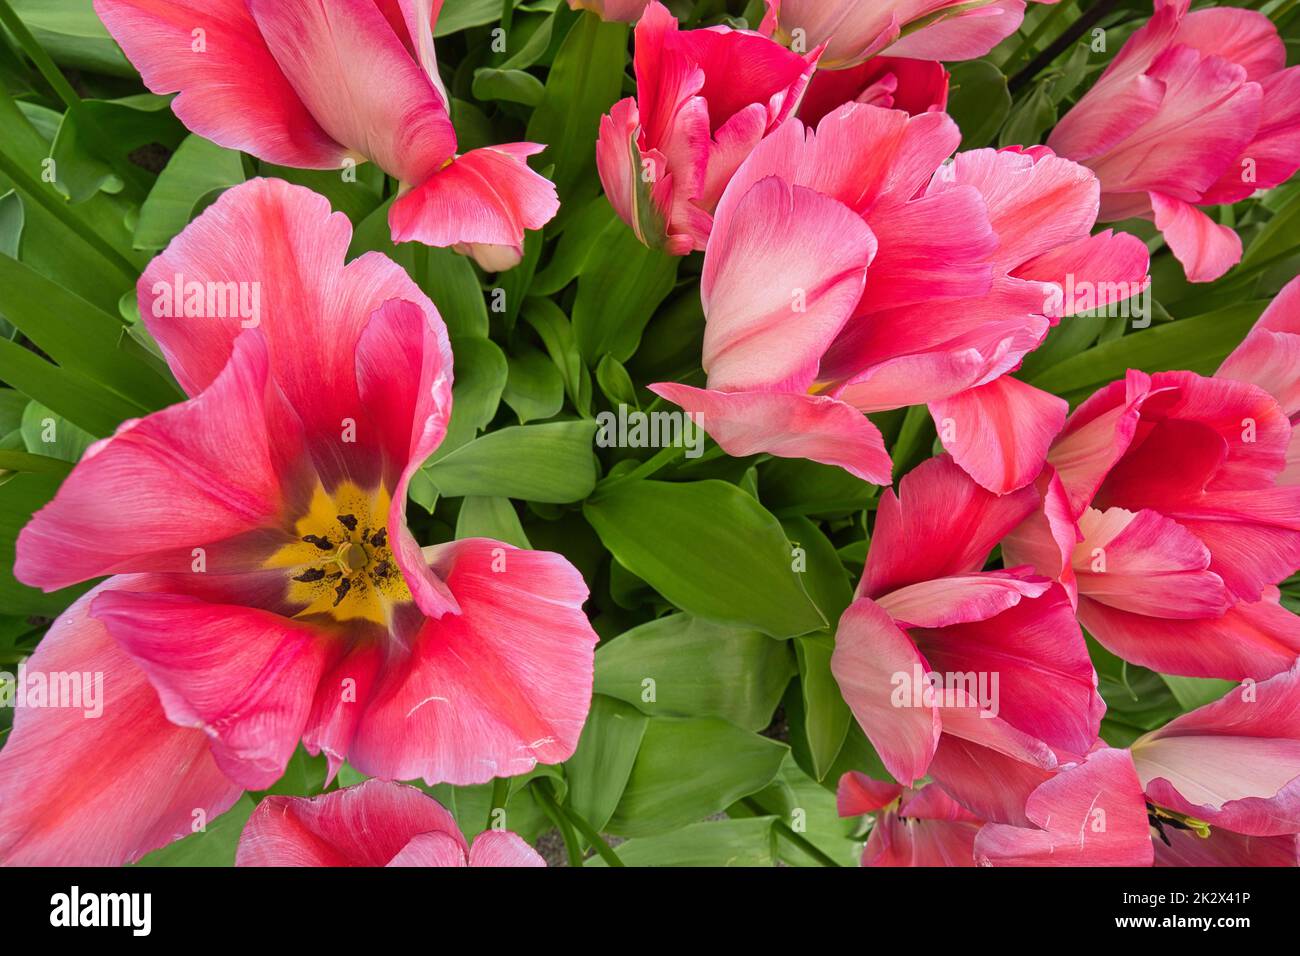 Flowers from above with an open flower blossom Stock Photo